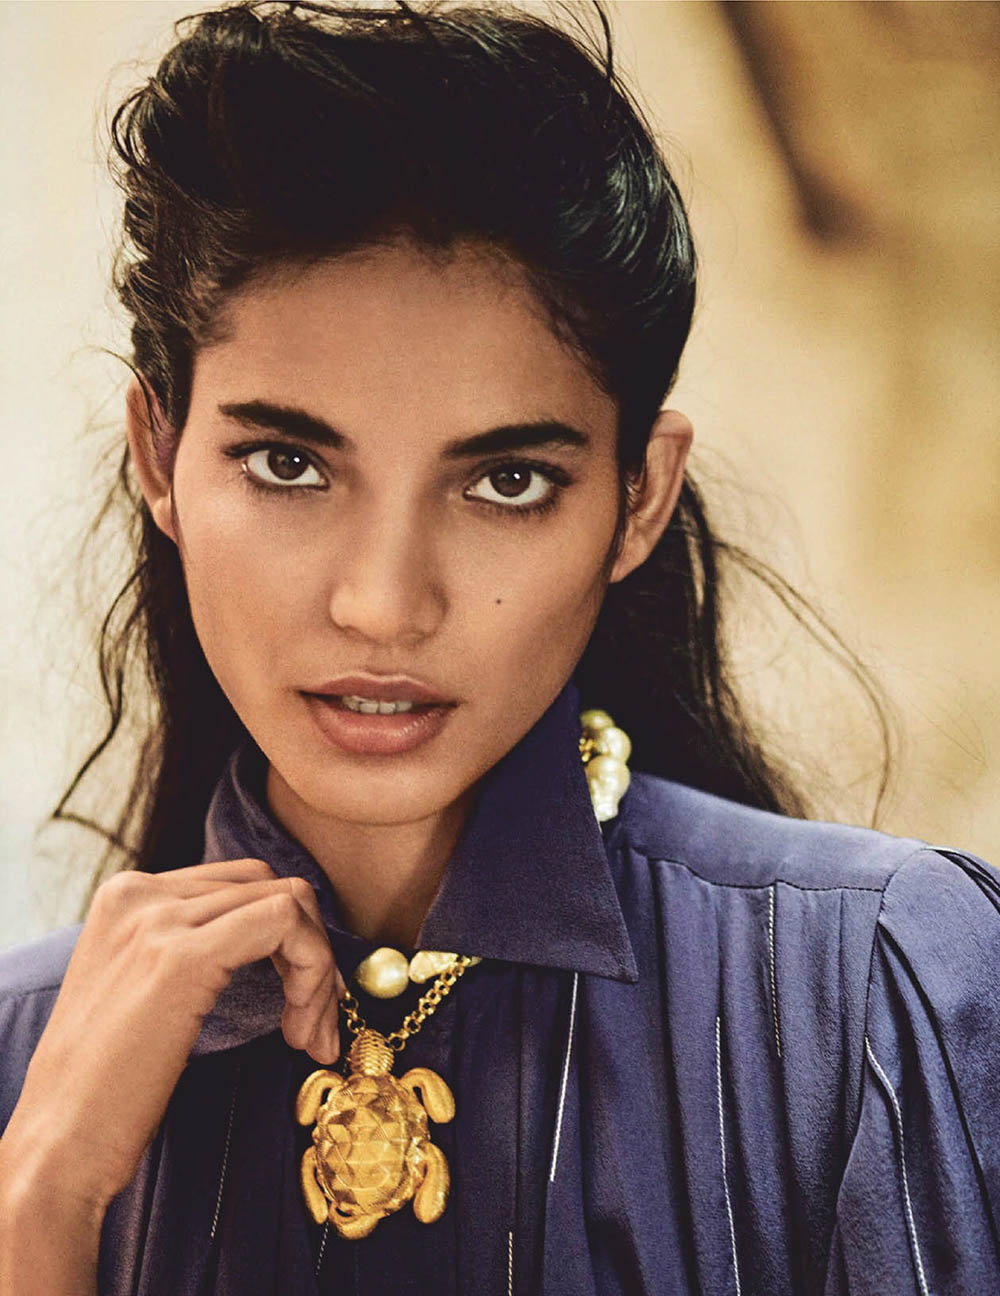 Amrit covers Vogue India October 2020 by Boo George